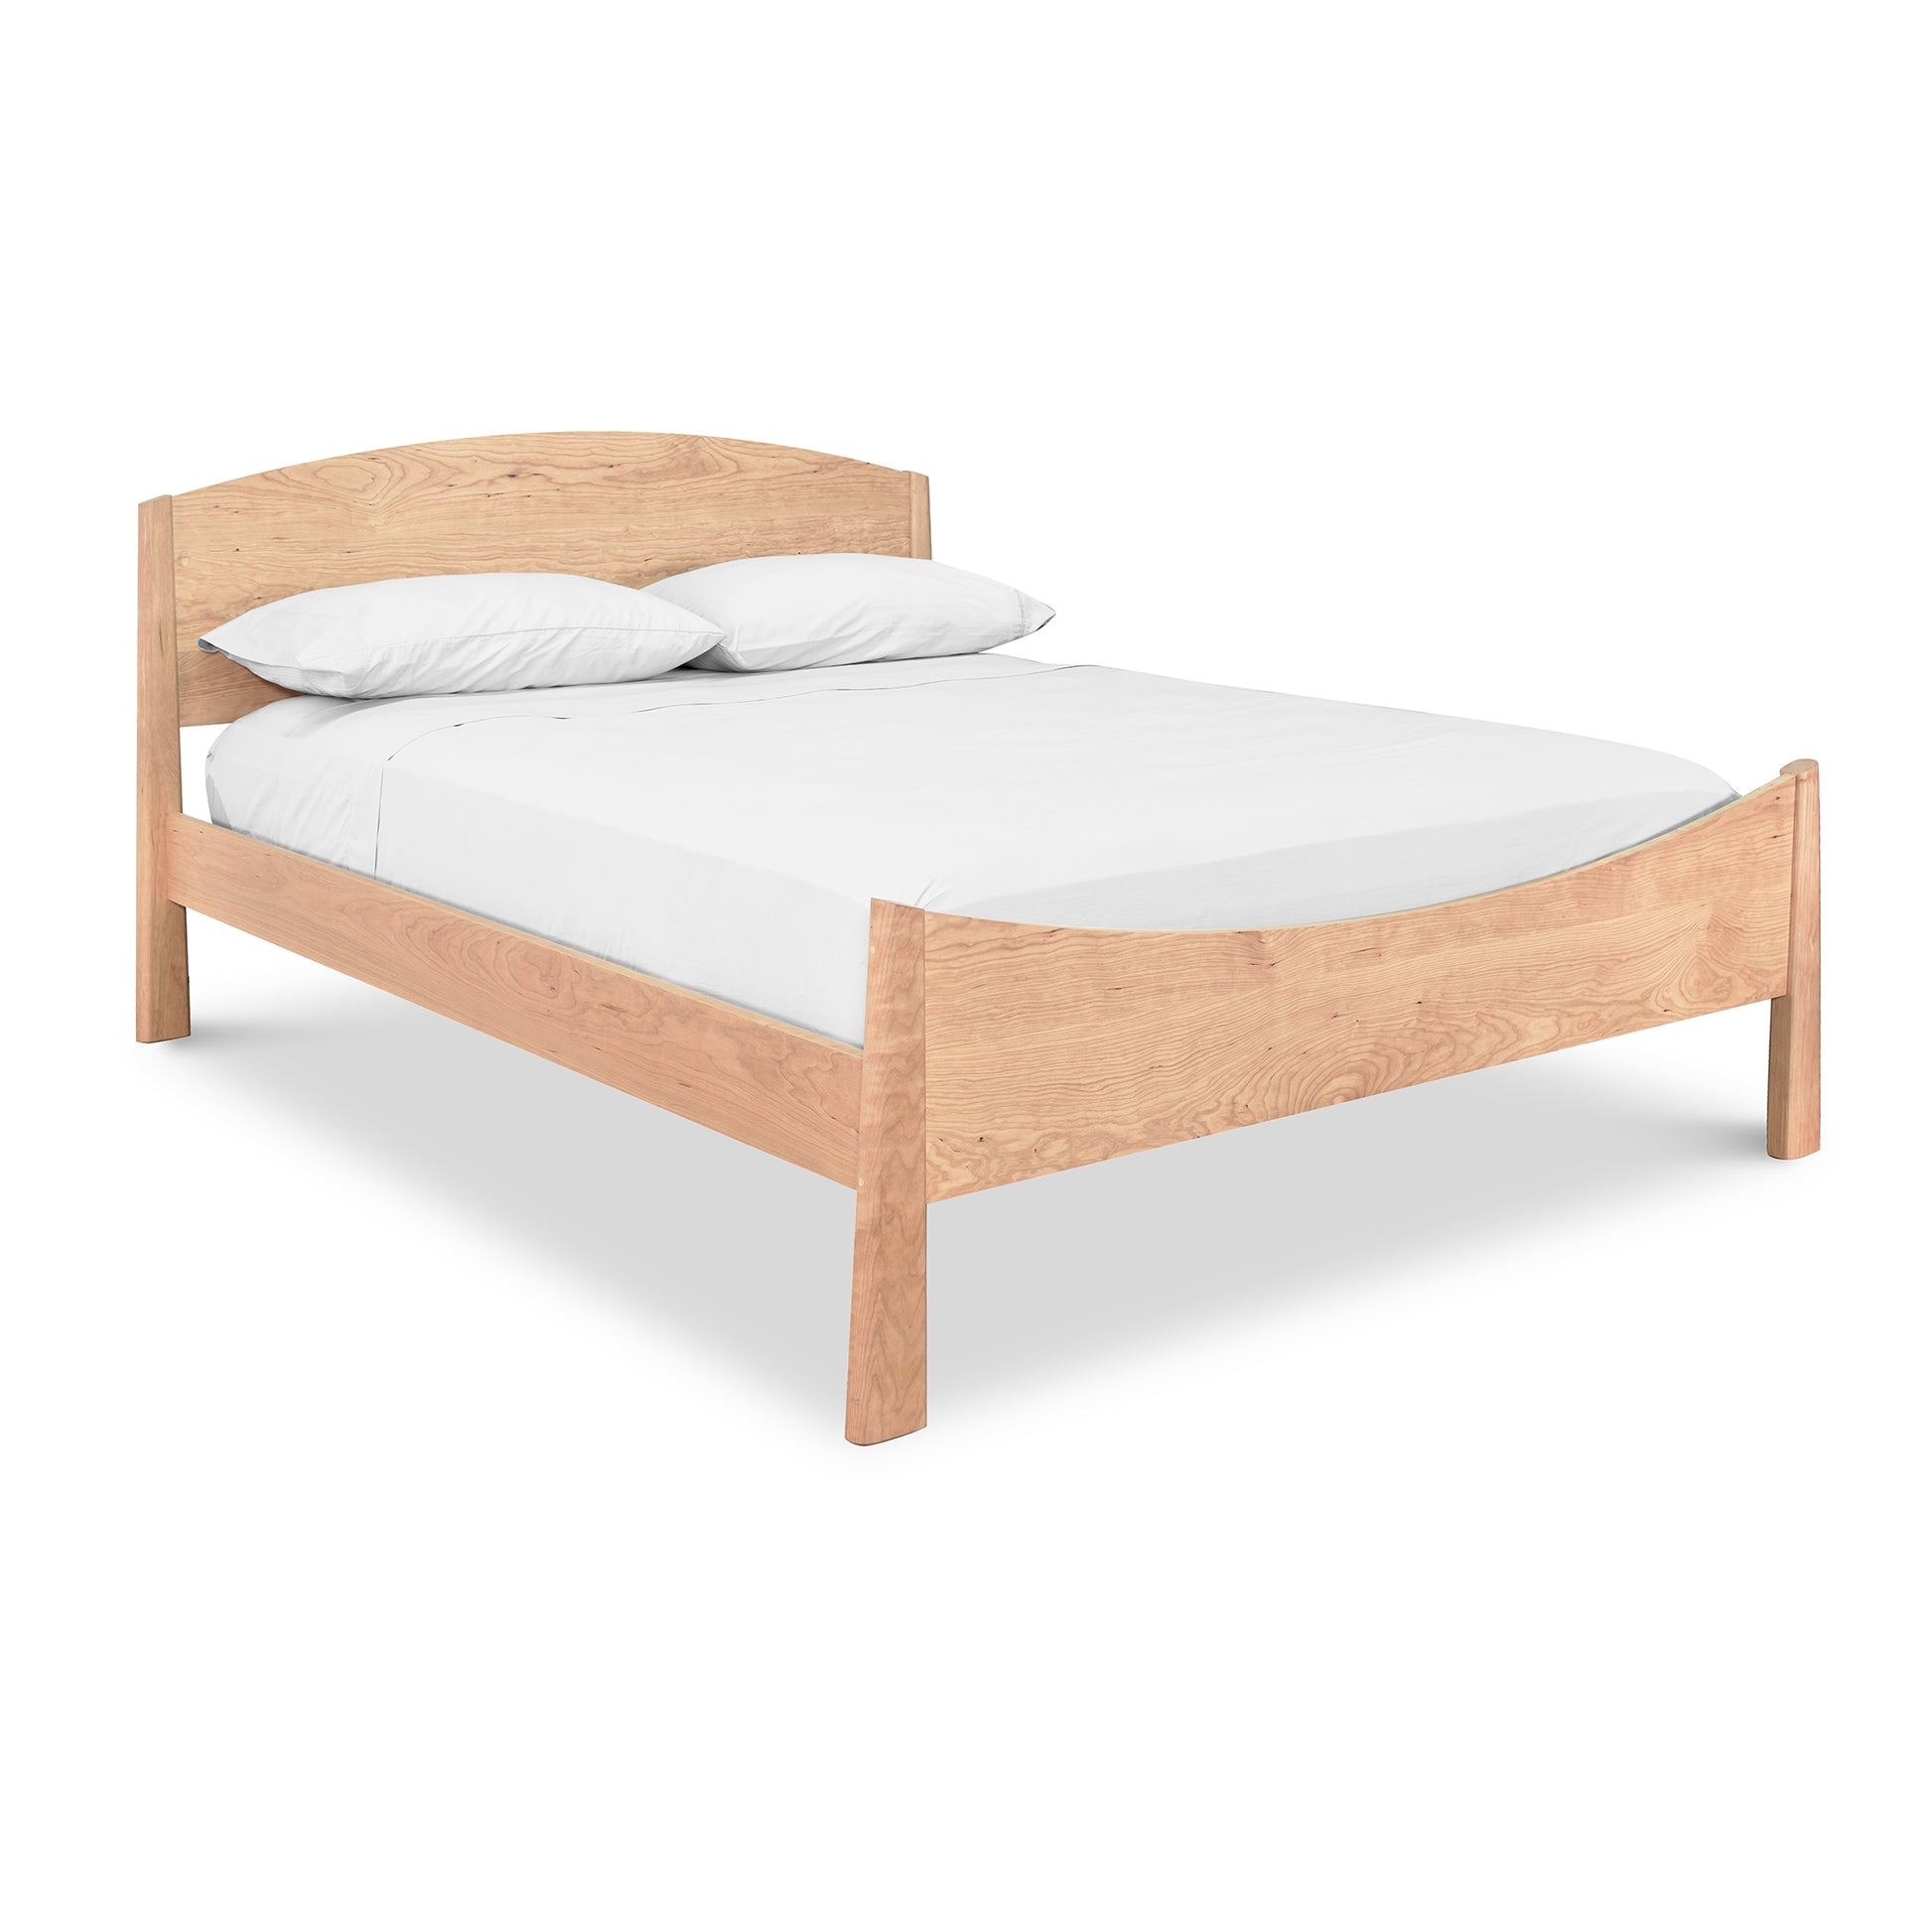 A minimalist Maple Corner Woodworks Cherry Moon Bed frame with a headboard, crafted from sustainably harvested woods, featuring crisp white bedding and two pillows, isolated on a plain white background.